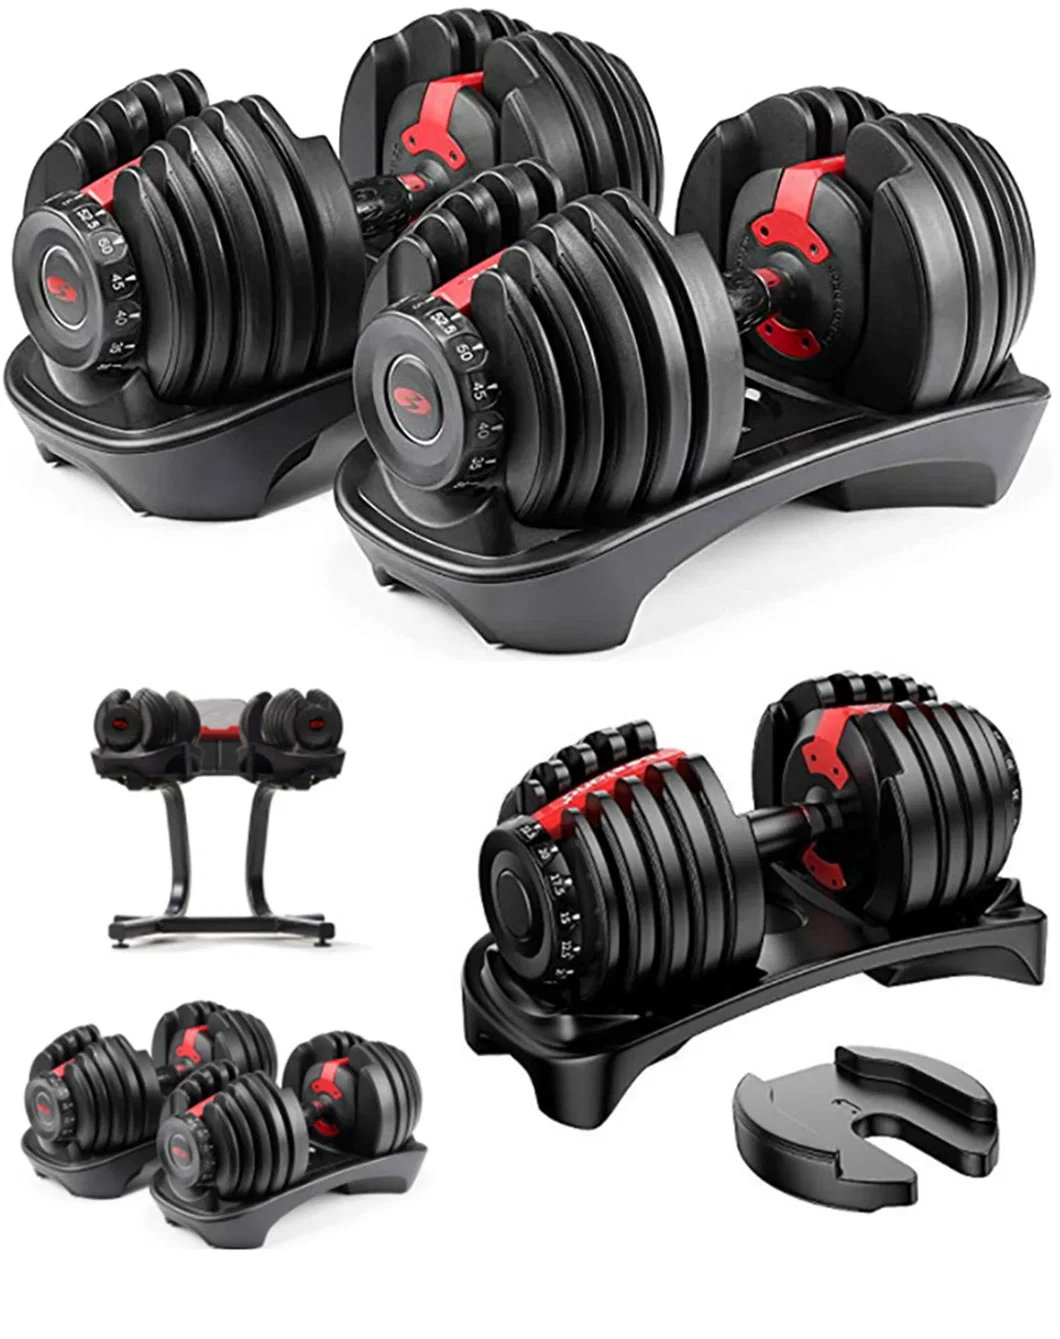 Commercial Fitness Equipment Accessories Adjustable Dumbbells Weight Lifting